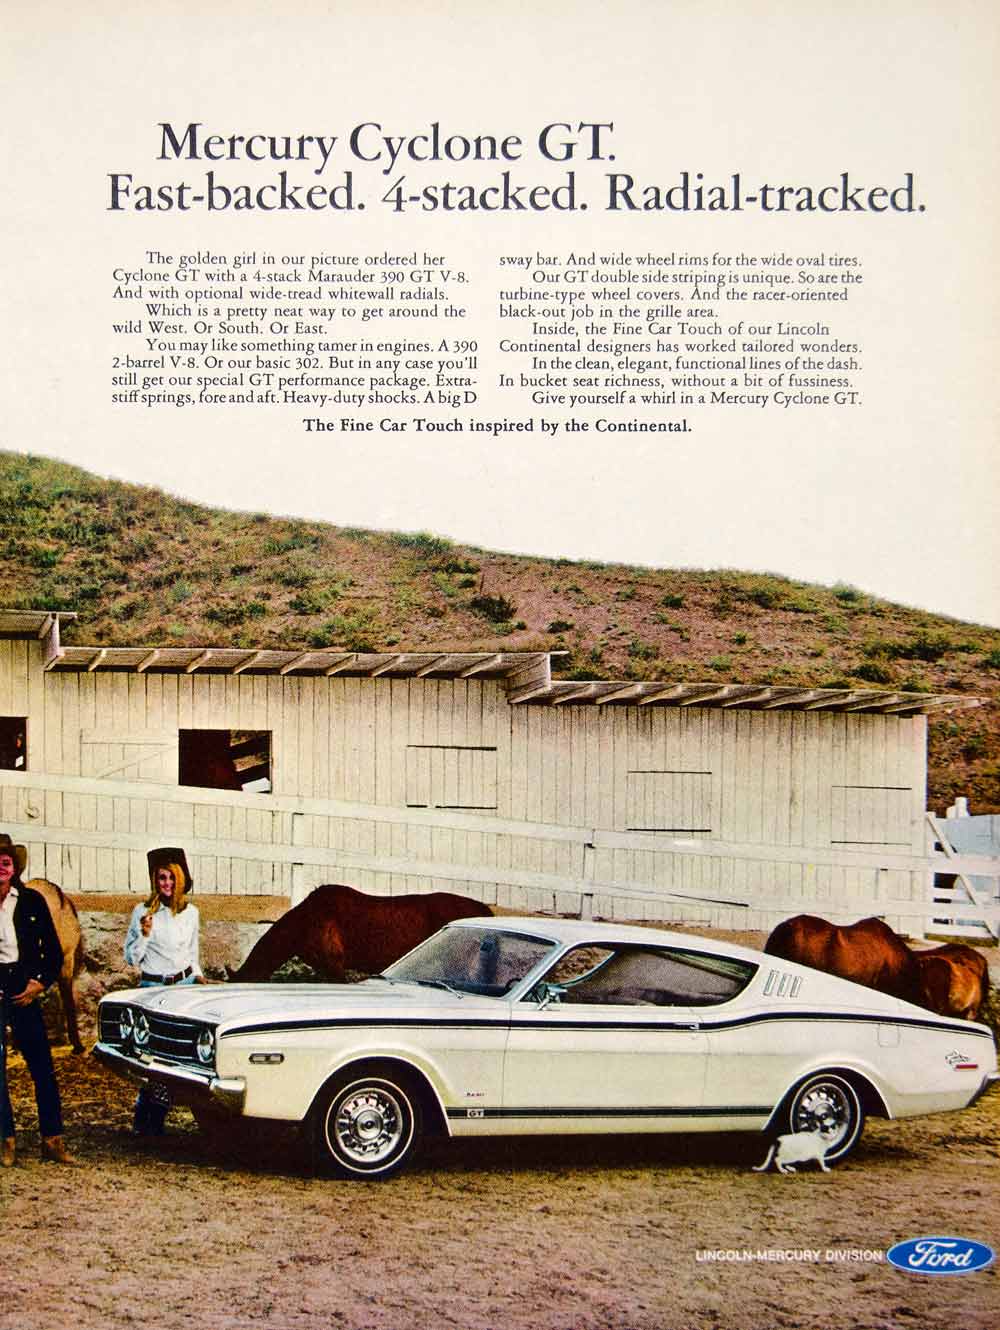 1968 Ad Mercury Cyclone GT Ford Body Stripe Muscle Car 2 Door Coupe YCD6